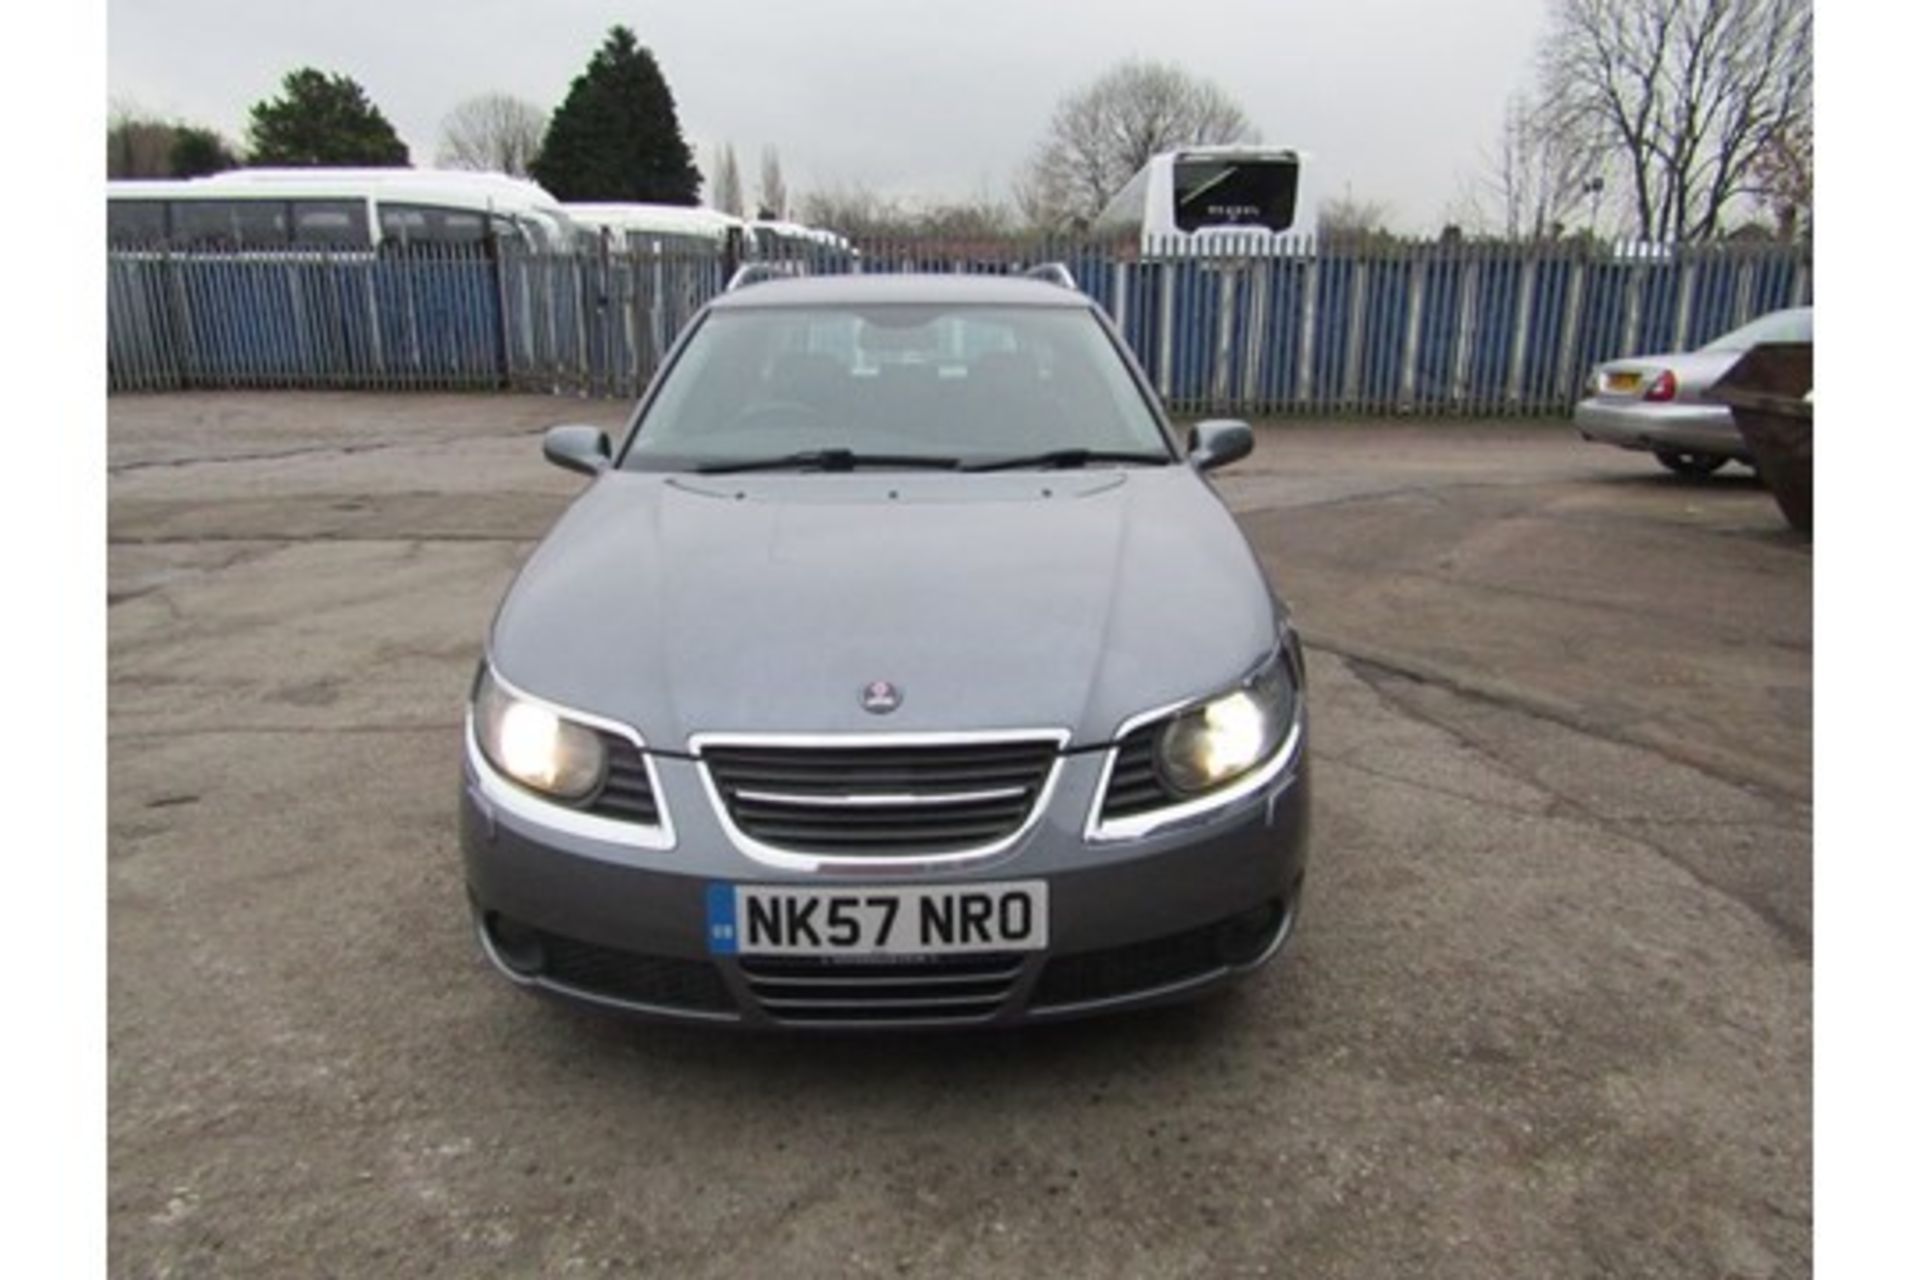 57 plate Saab Vector Sport 1.9 TDI estate, 125,617 miles, MOT until April 2019, comes with owners